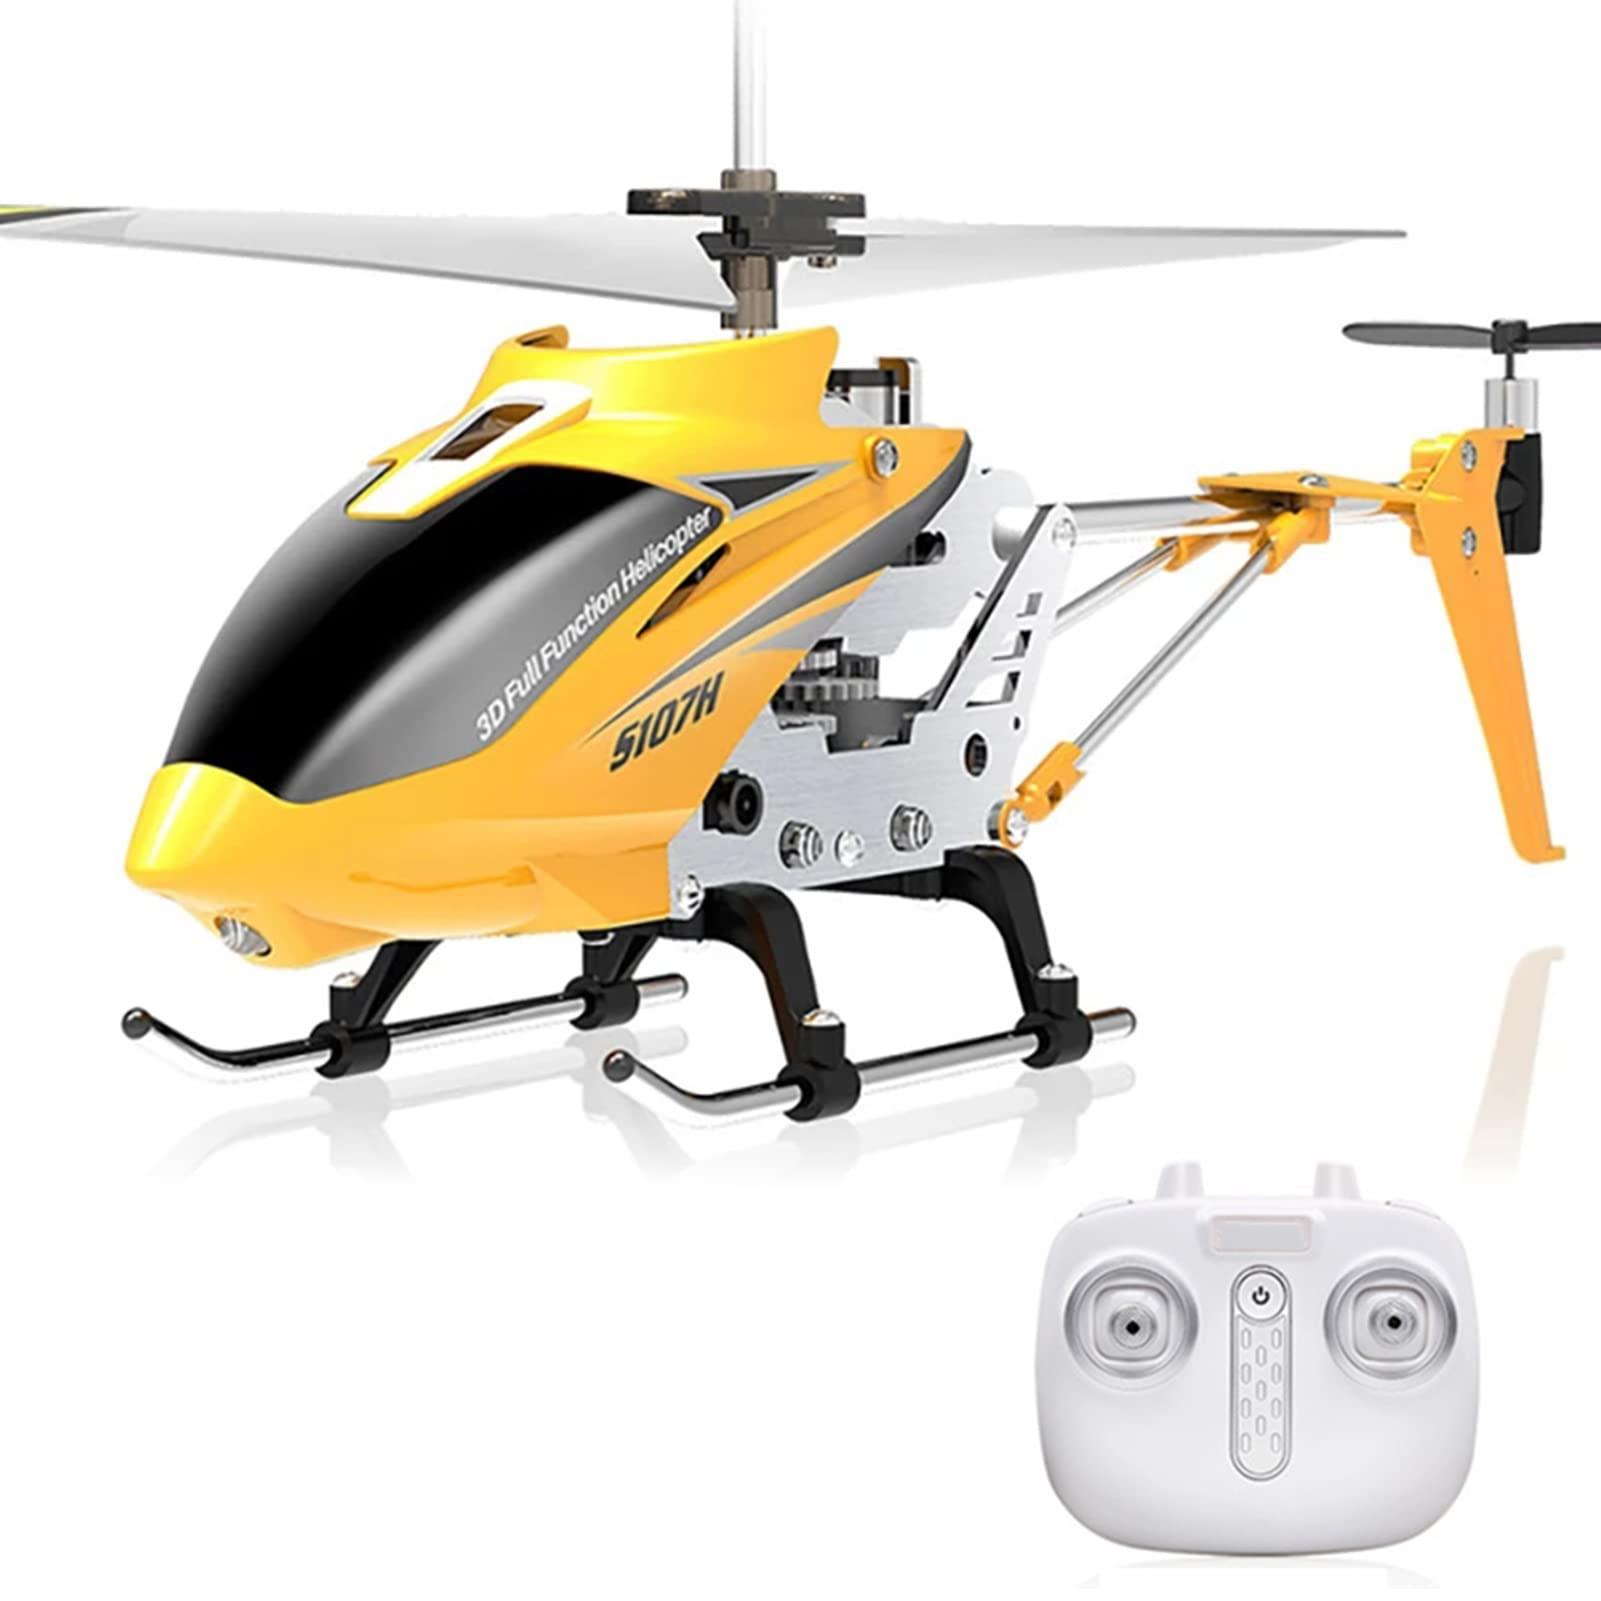 Hover Rc Helicopter: Different Brands and Models of Hover RC Helicopters